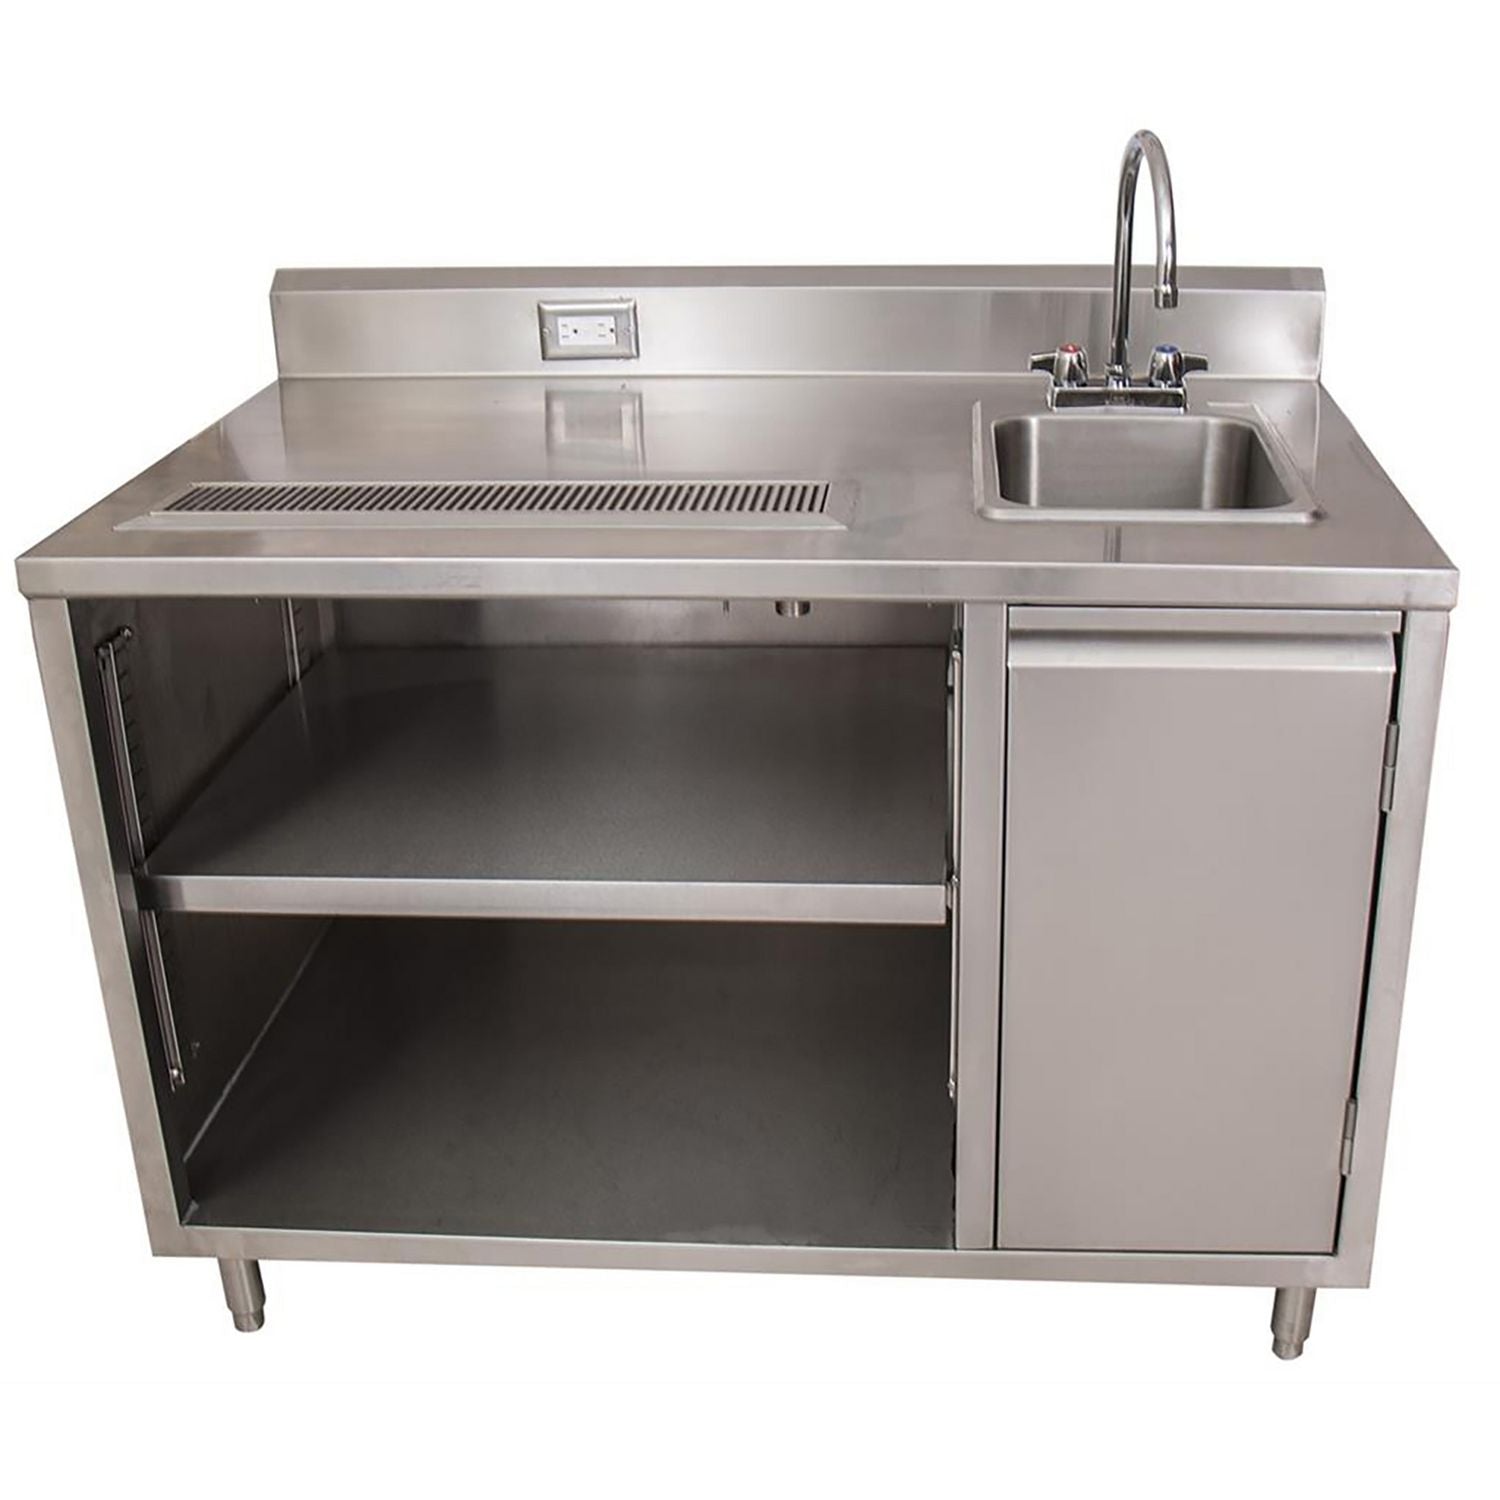 stainless-steel-beverage-table-with-right-sink-rectangular-30-x-72-x-415-silver-ships-in-4-6-business-days_bkebevt3072r - 1